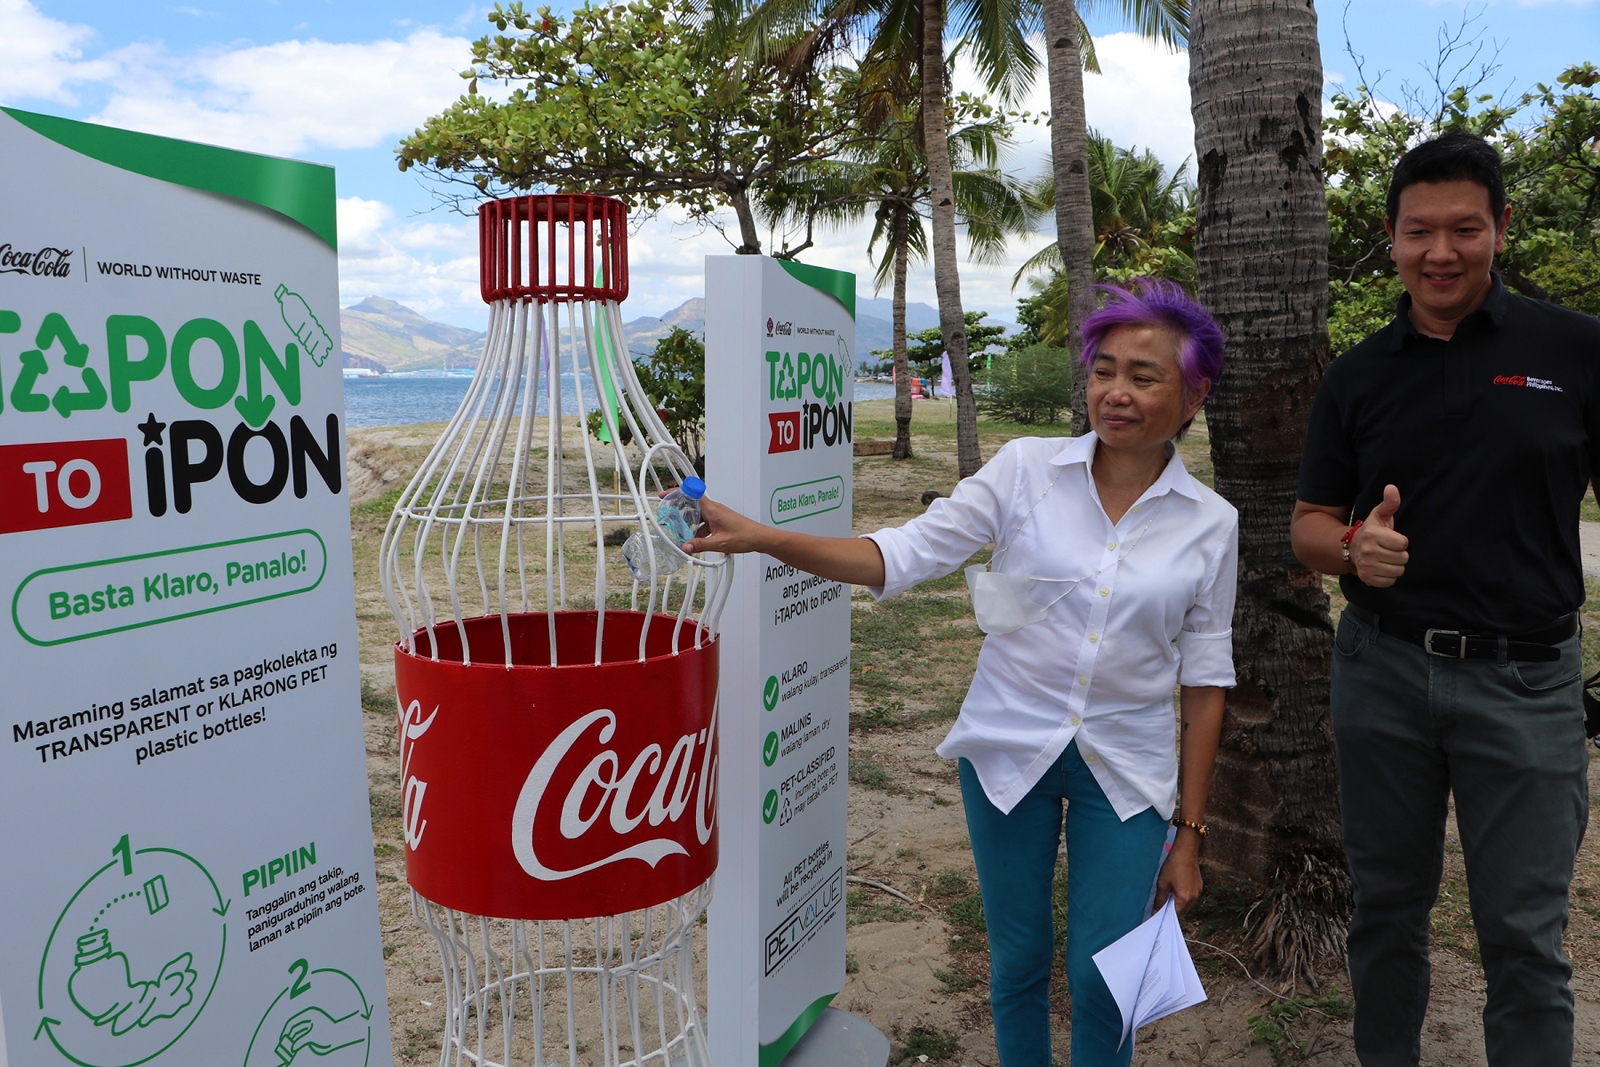 SBMA OIC-Senior Deputy Administrator for Regulatory Group and manager of Ecology Center Amethya P. Dela Llana drops a PET plastic bottle inside the collection bin while looking on is Atty. Marc Anthony Cox, Director for Stakeholders Relations, Corporate and Regulatory Affairs of the Coca-Cola Beverages Philippines Inc., during the launch of World Without Waste Project at the Boardwalk Events Center in Subic Bay Freeport zone on Wednesday, April 27. The project entails setting up of collection stations in different locations within the Freeport zone for the purpose of collecting and recycling pet plastic bottles and aluminum cans sold by the company for recycling purposes.